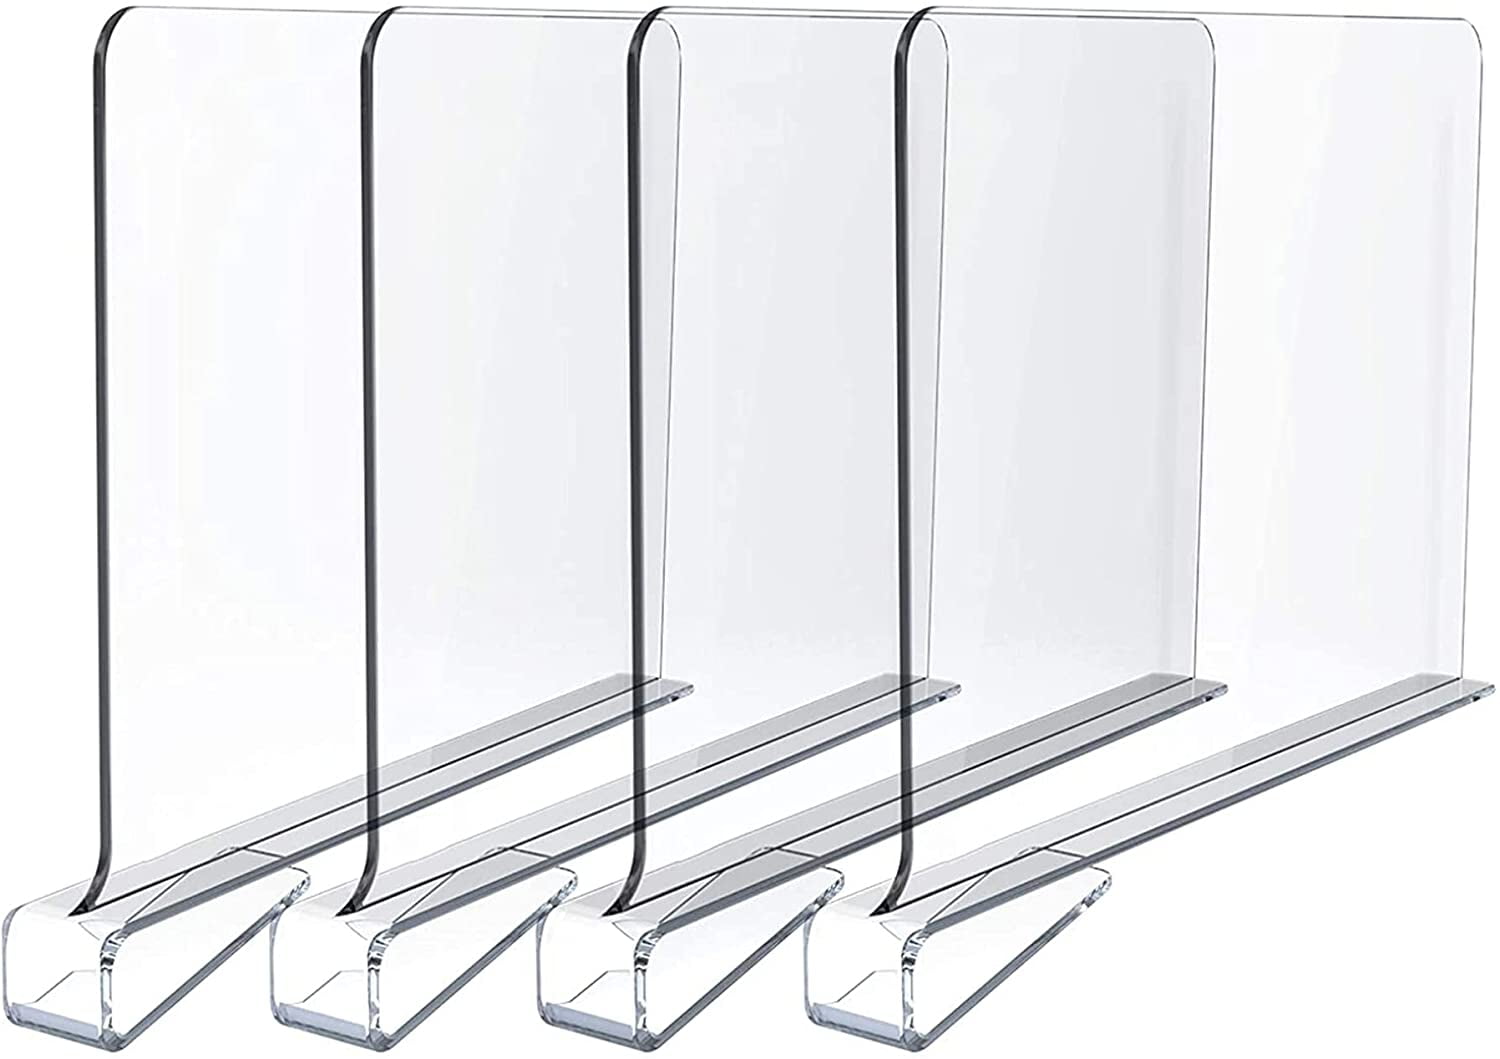 HighFree Acrylic Shelf Dividers for Closets,Wood Shelf Dividers Clear Shelf Separators,Cabinets Shelf Storage and Organization Without Drilling for